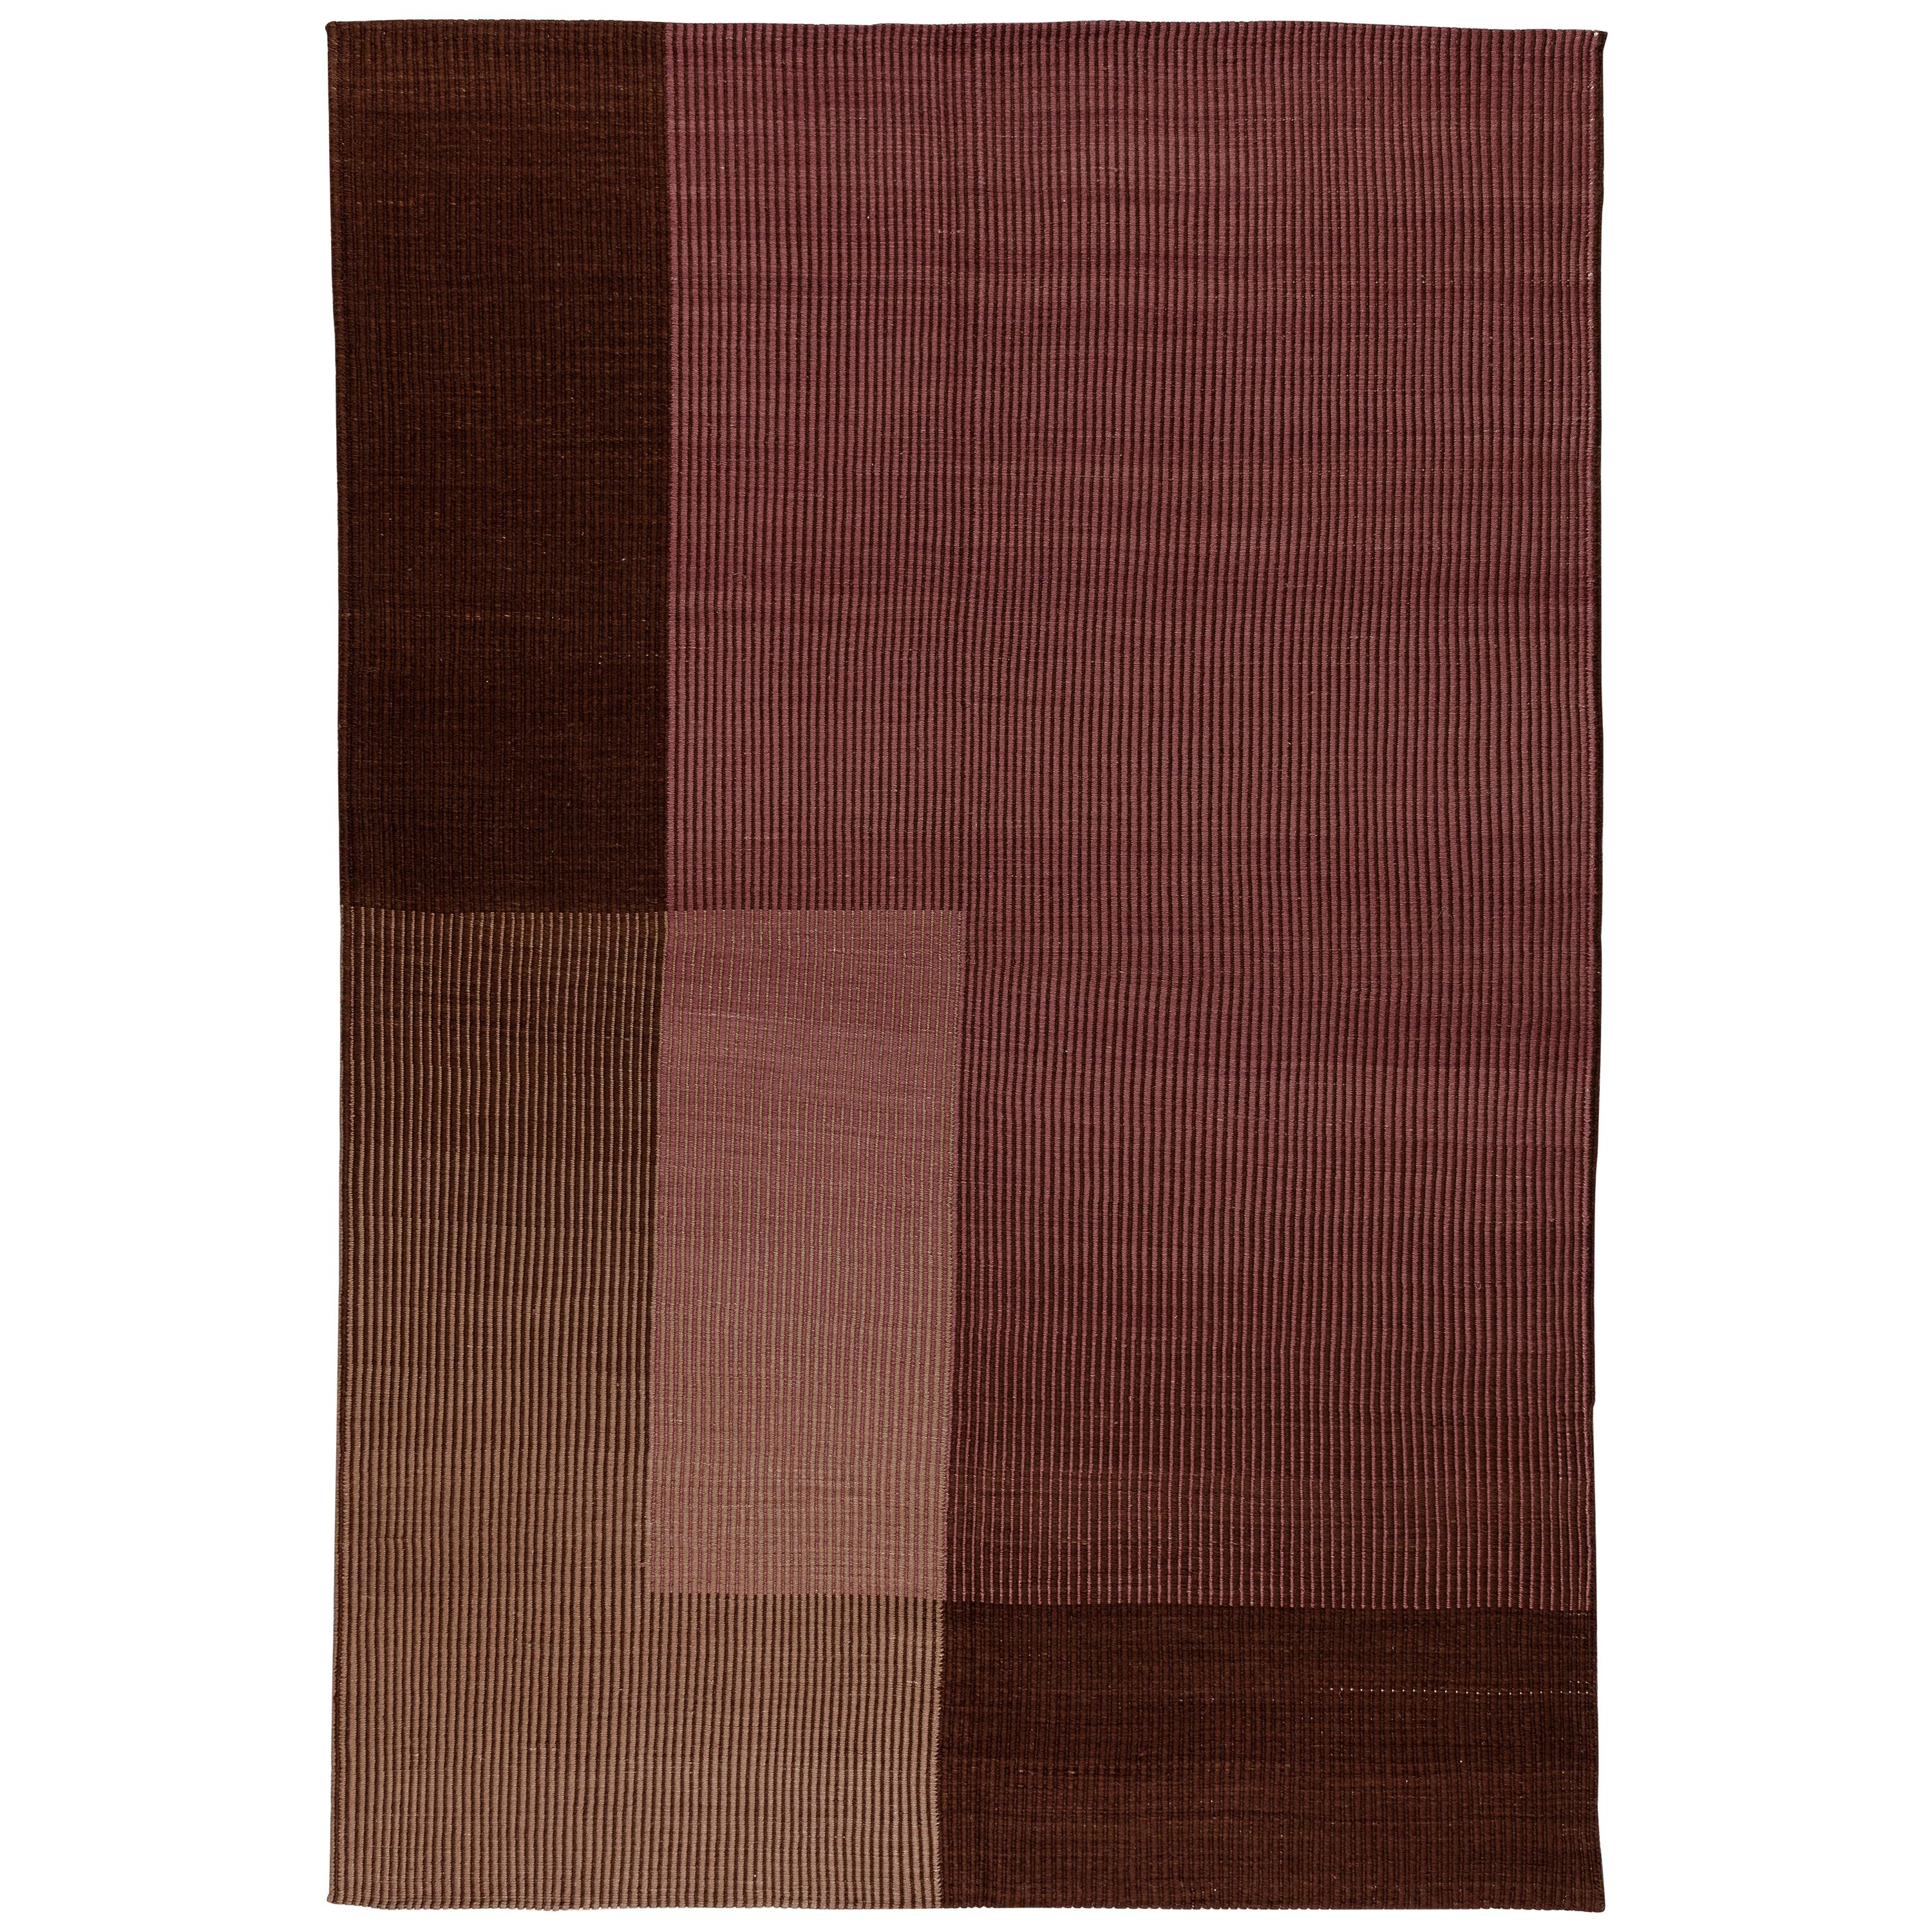 Haze Editions Contemporary Kilim Area Rug Wool Handwoven in Brown and Dusty Rose